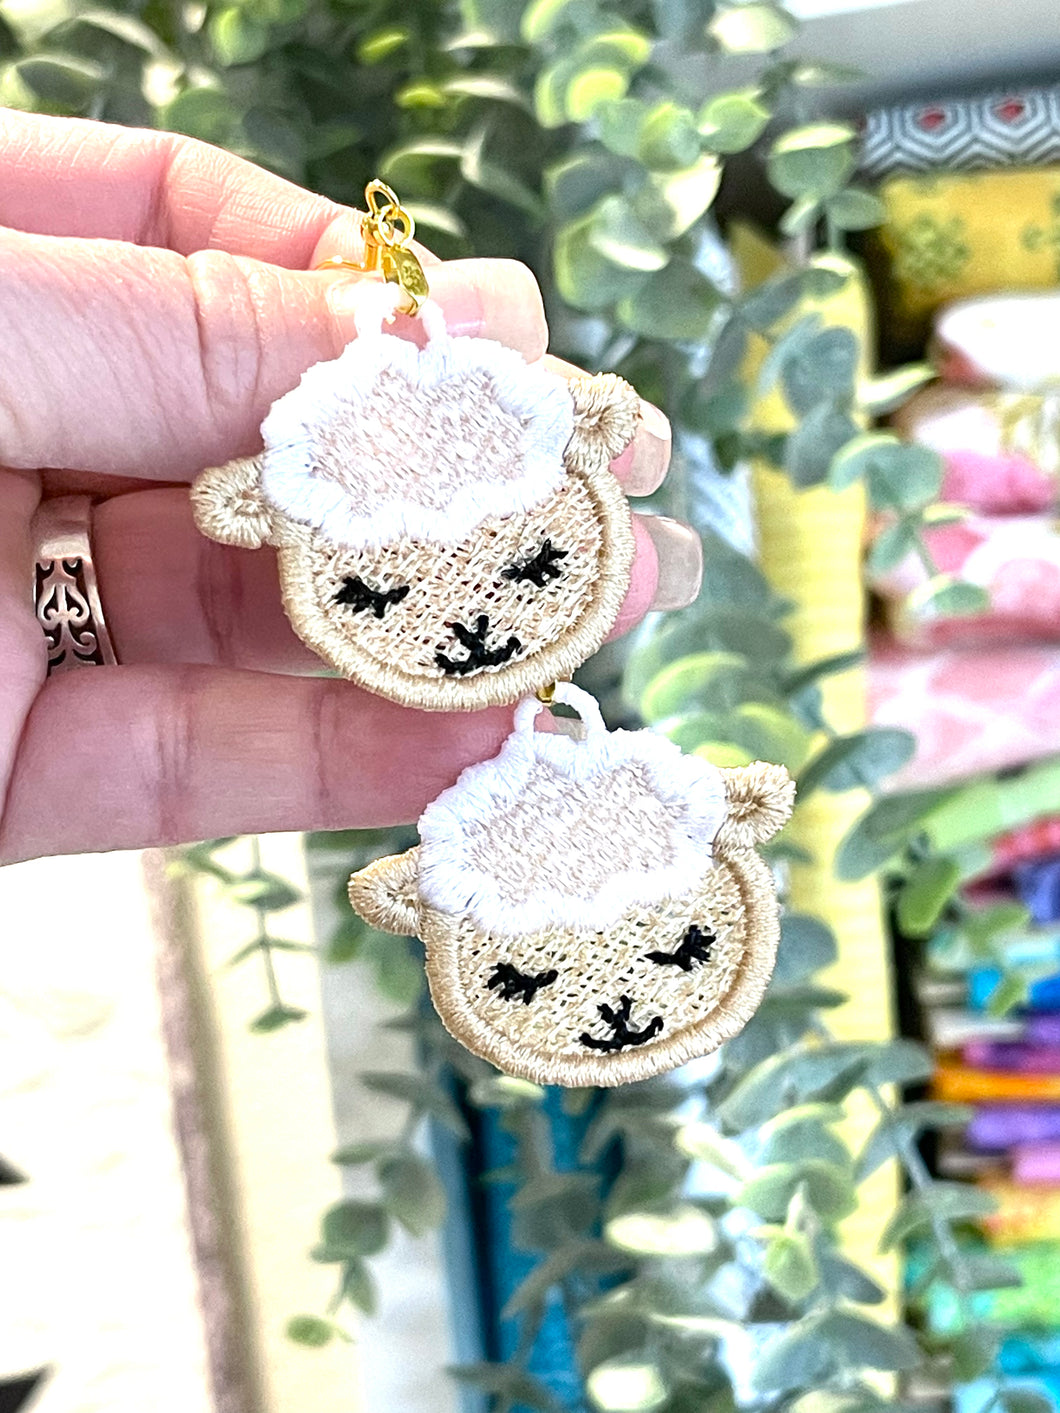 Lamb or Sheep Face FSL Earrings - In the Hoop Freestanding Lace Earrings Design for Machine Embroidery